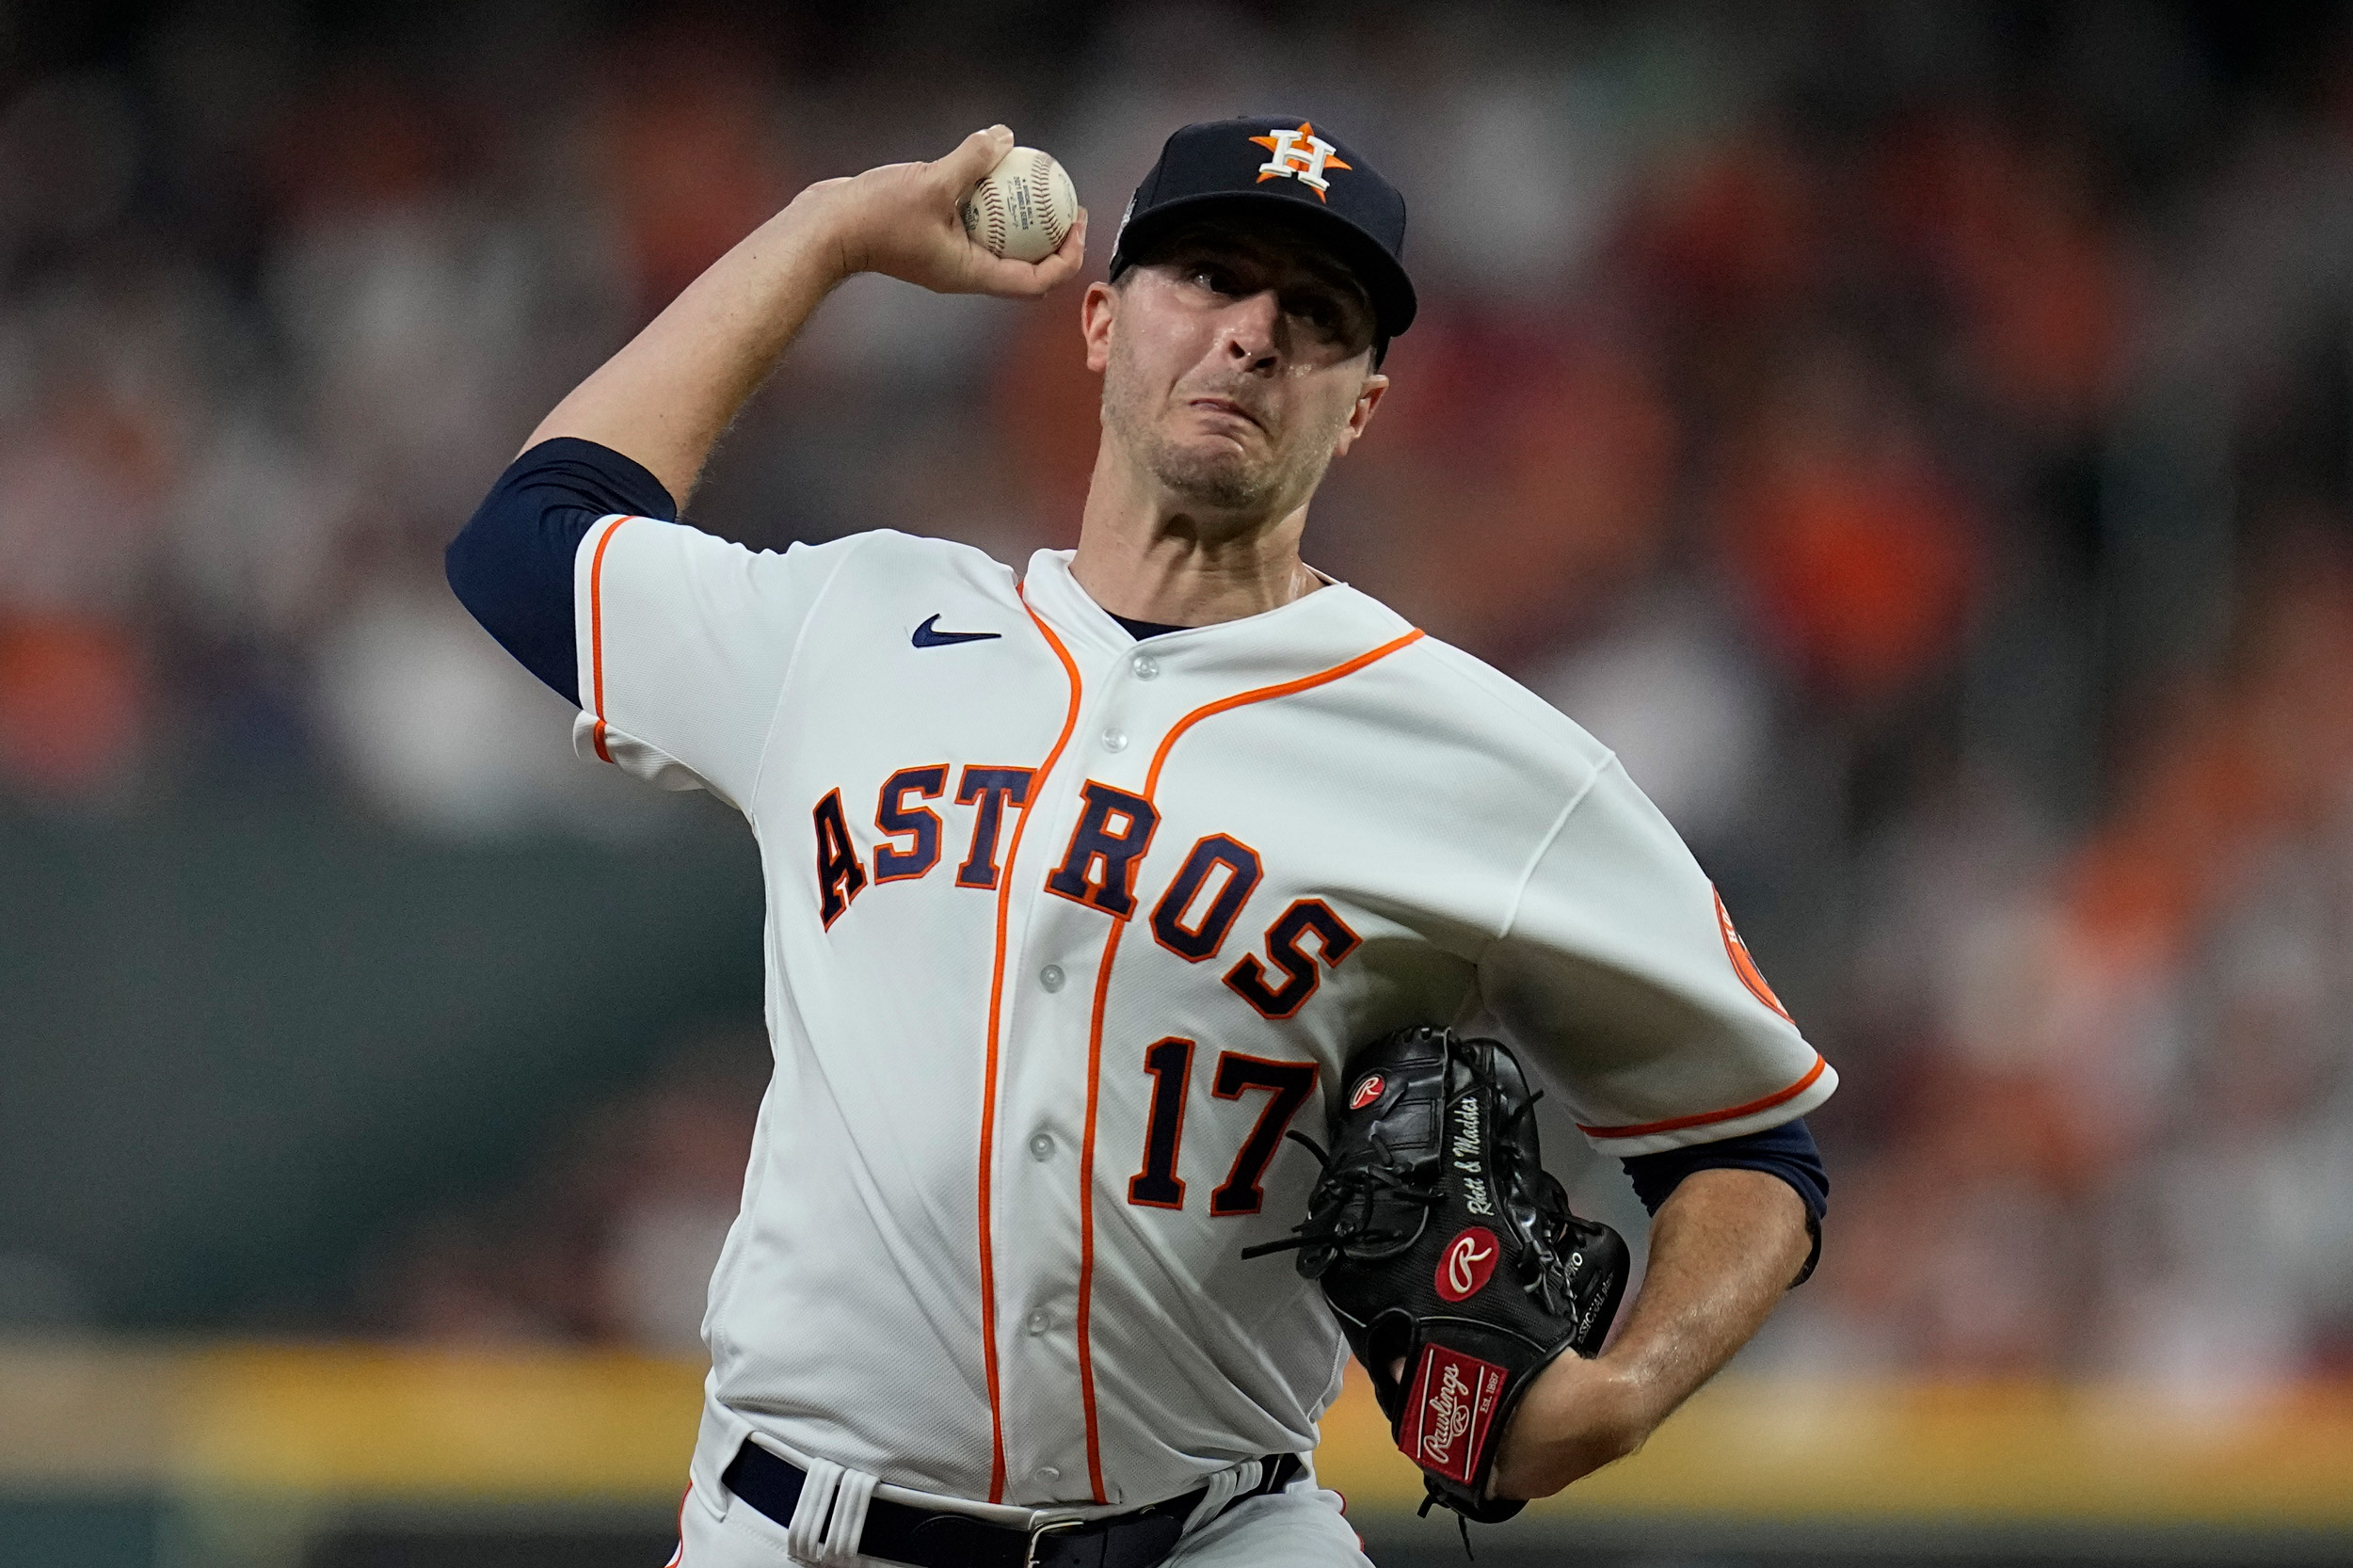 Houston Astros pitcher Jake Odorizzi throws during the fourth inning of Game 1 in baseball's World Series between the Houston Astros and the Atlanta Braves on October 26 in Houston. 